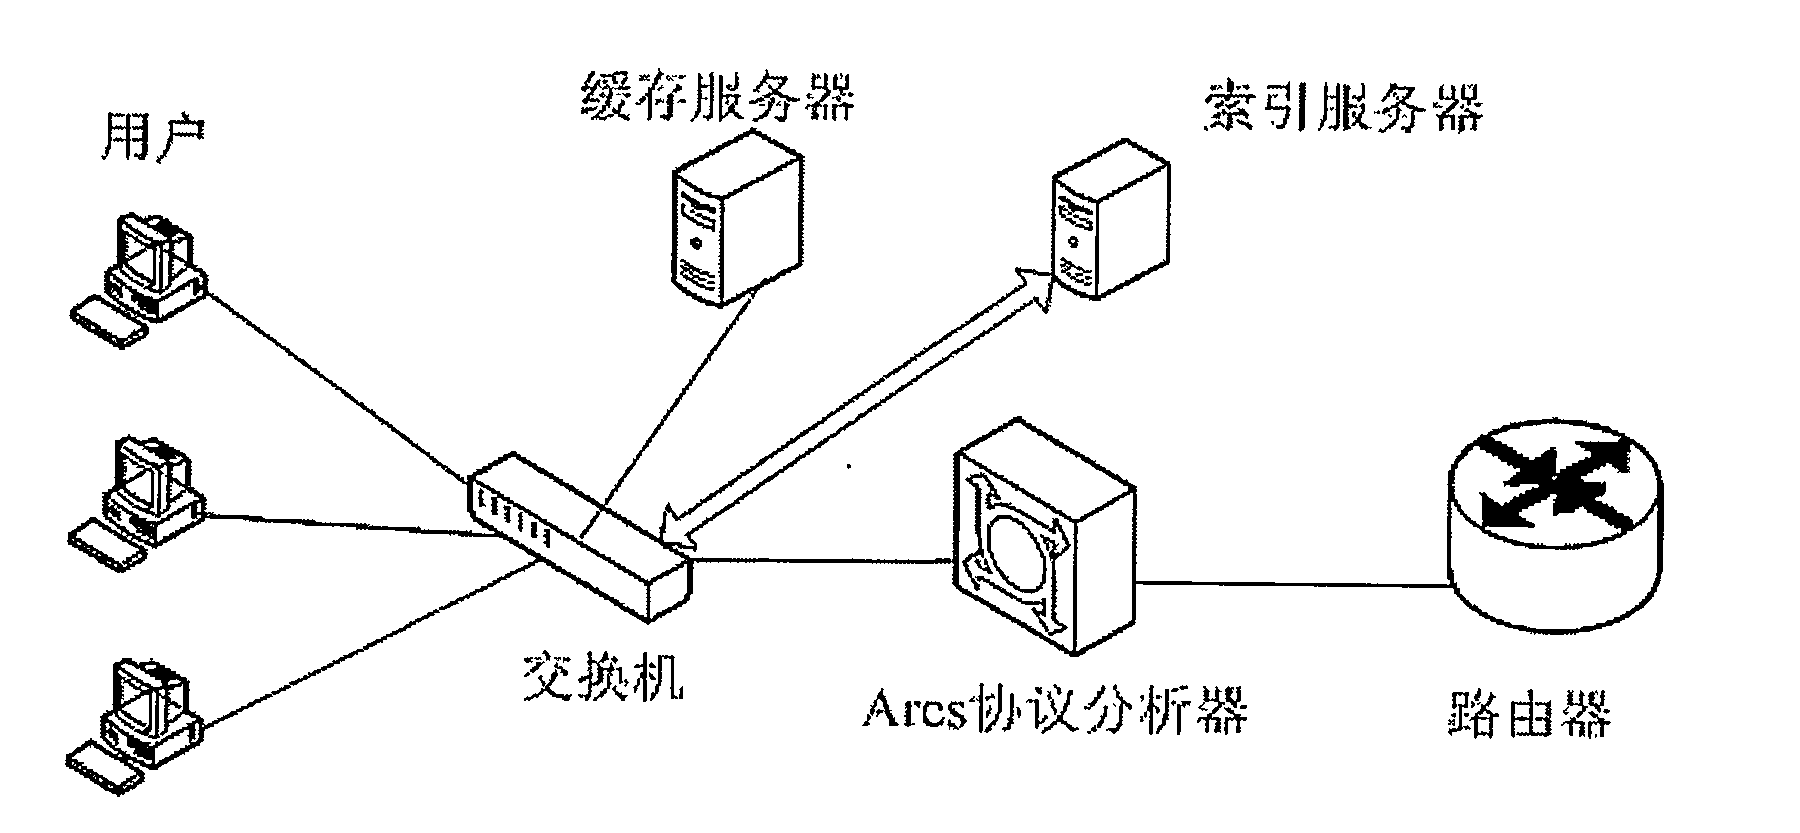 Method for realizing peer-to-peer network caching system based on Ares protocol